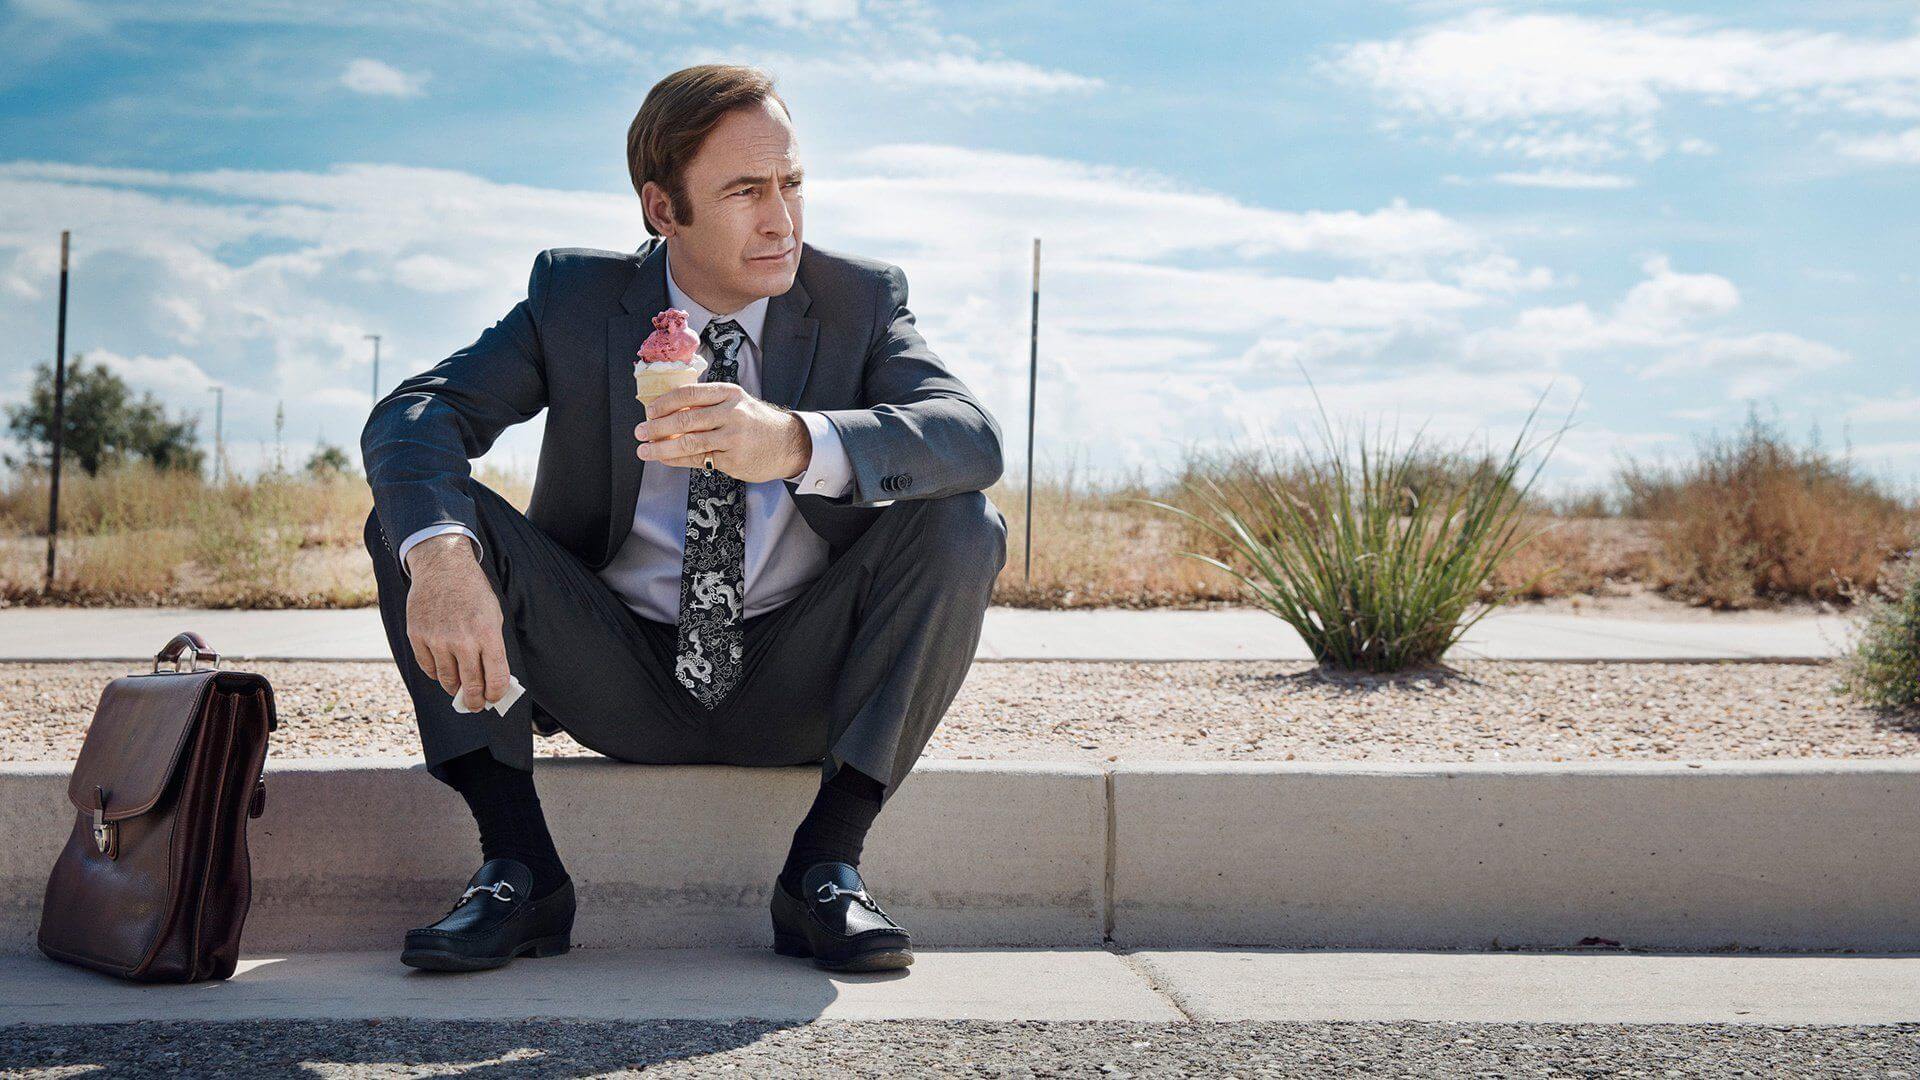 From “Saul” to “Eve,” these networks aim high